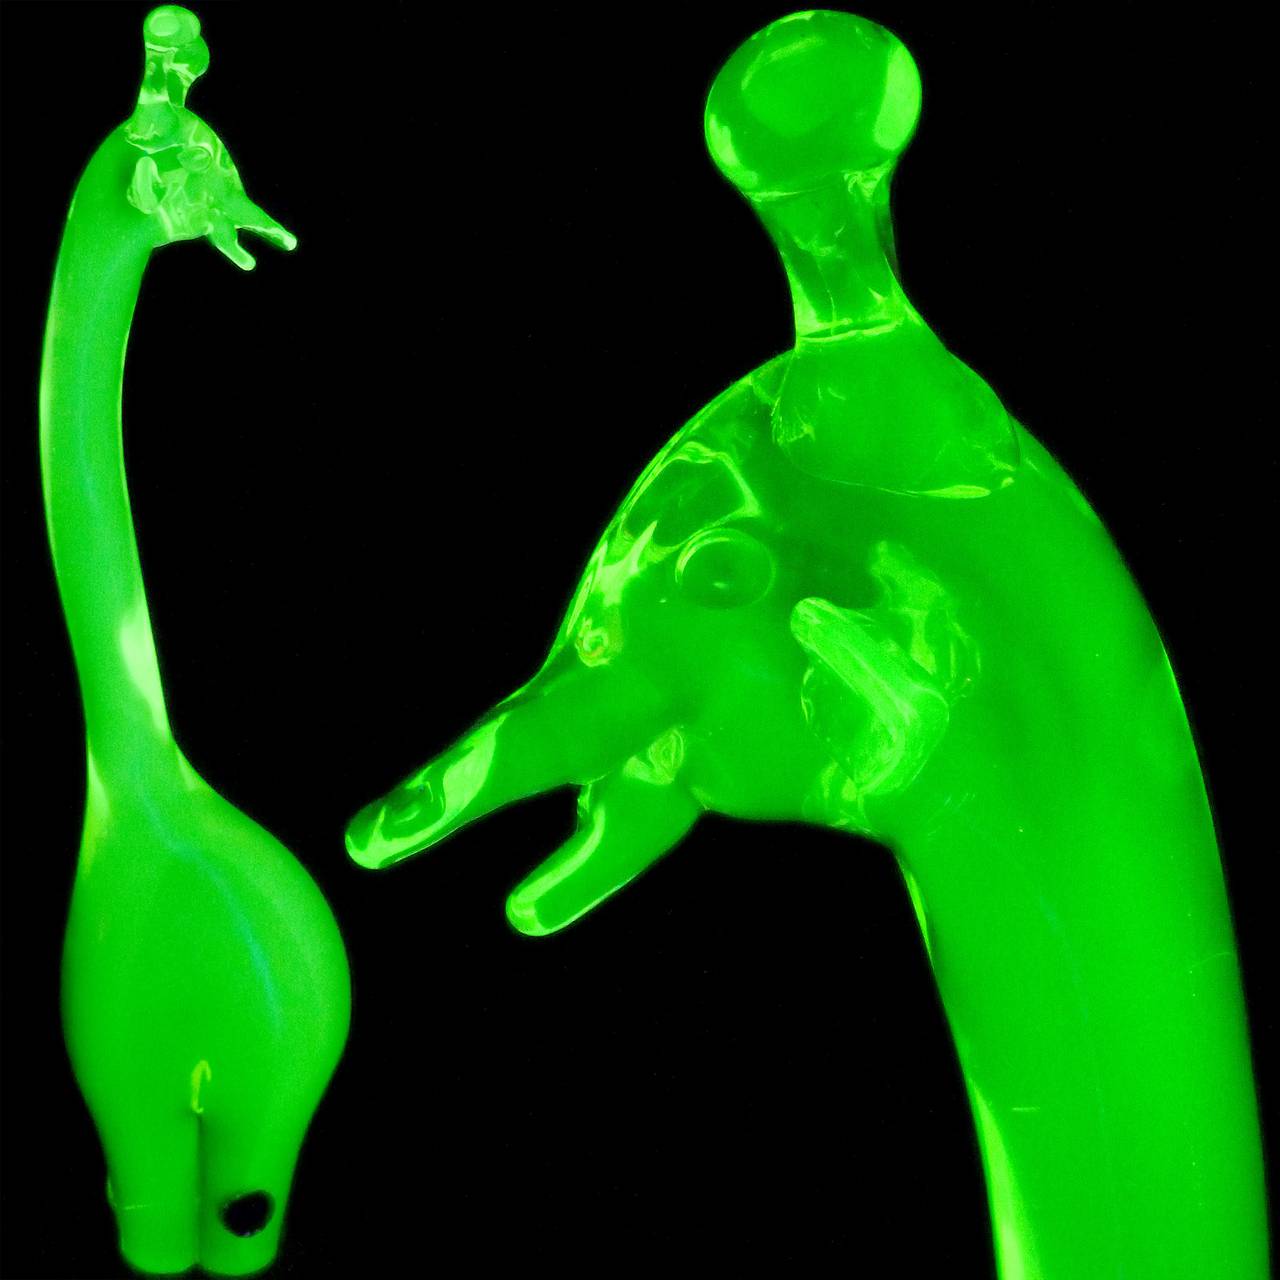 Free shipping worldwide!

Very Large, 16 1/2" Tall, Murano Hand Blown Sommerso Neon Yellow and Olive Green Art Glass Giraffe Sculpture. Attributed designer Luciano Gaspari for the Salviati company, circa 1950s. The piece still has the gallery